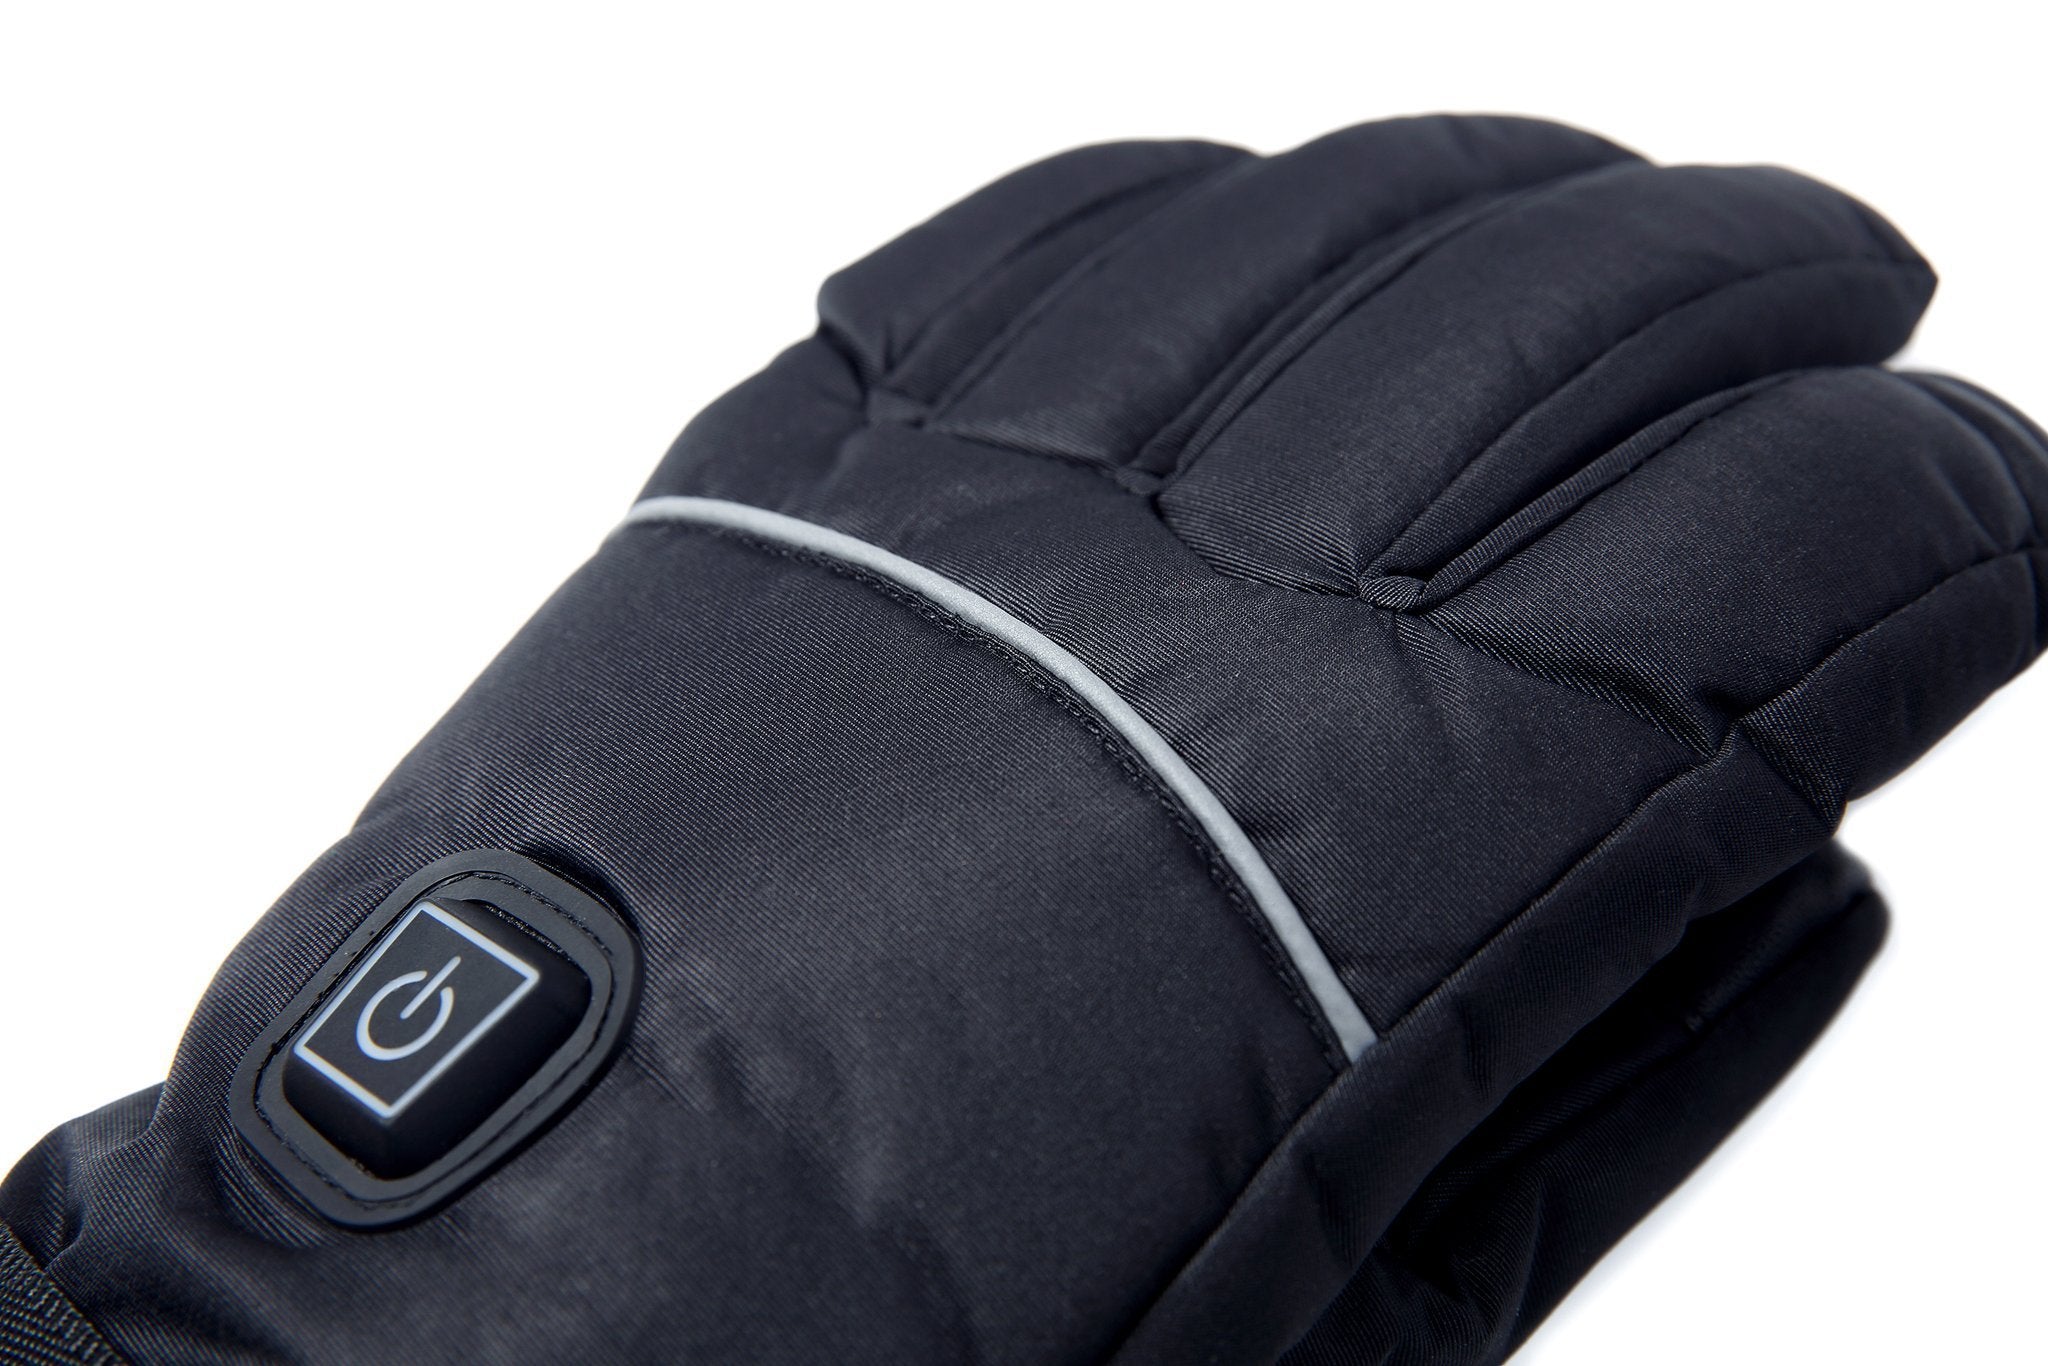 ELECTRIC HEATED GLOVES